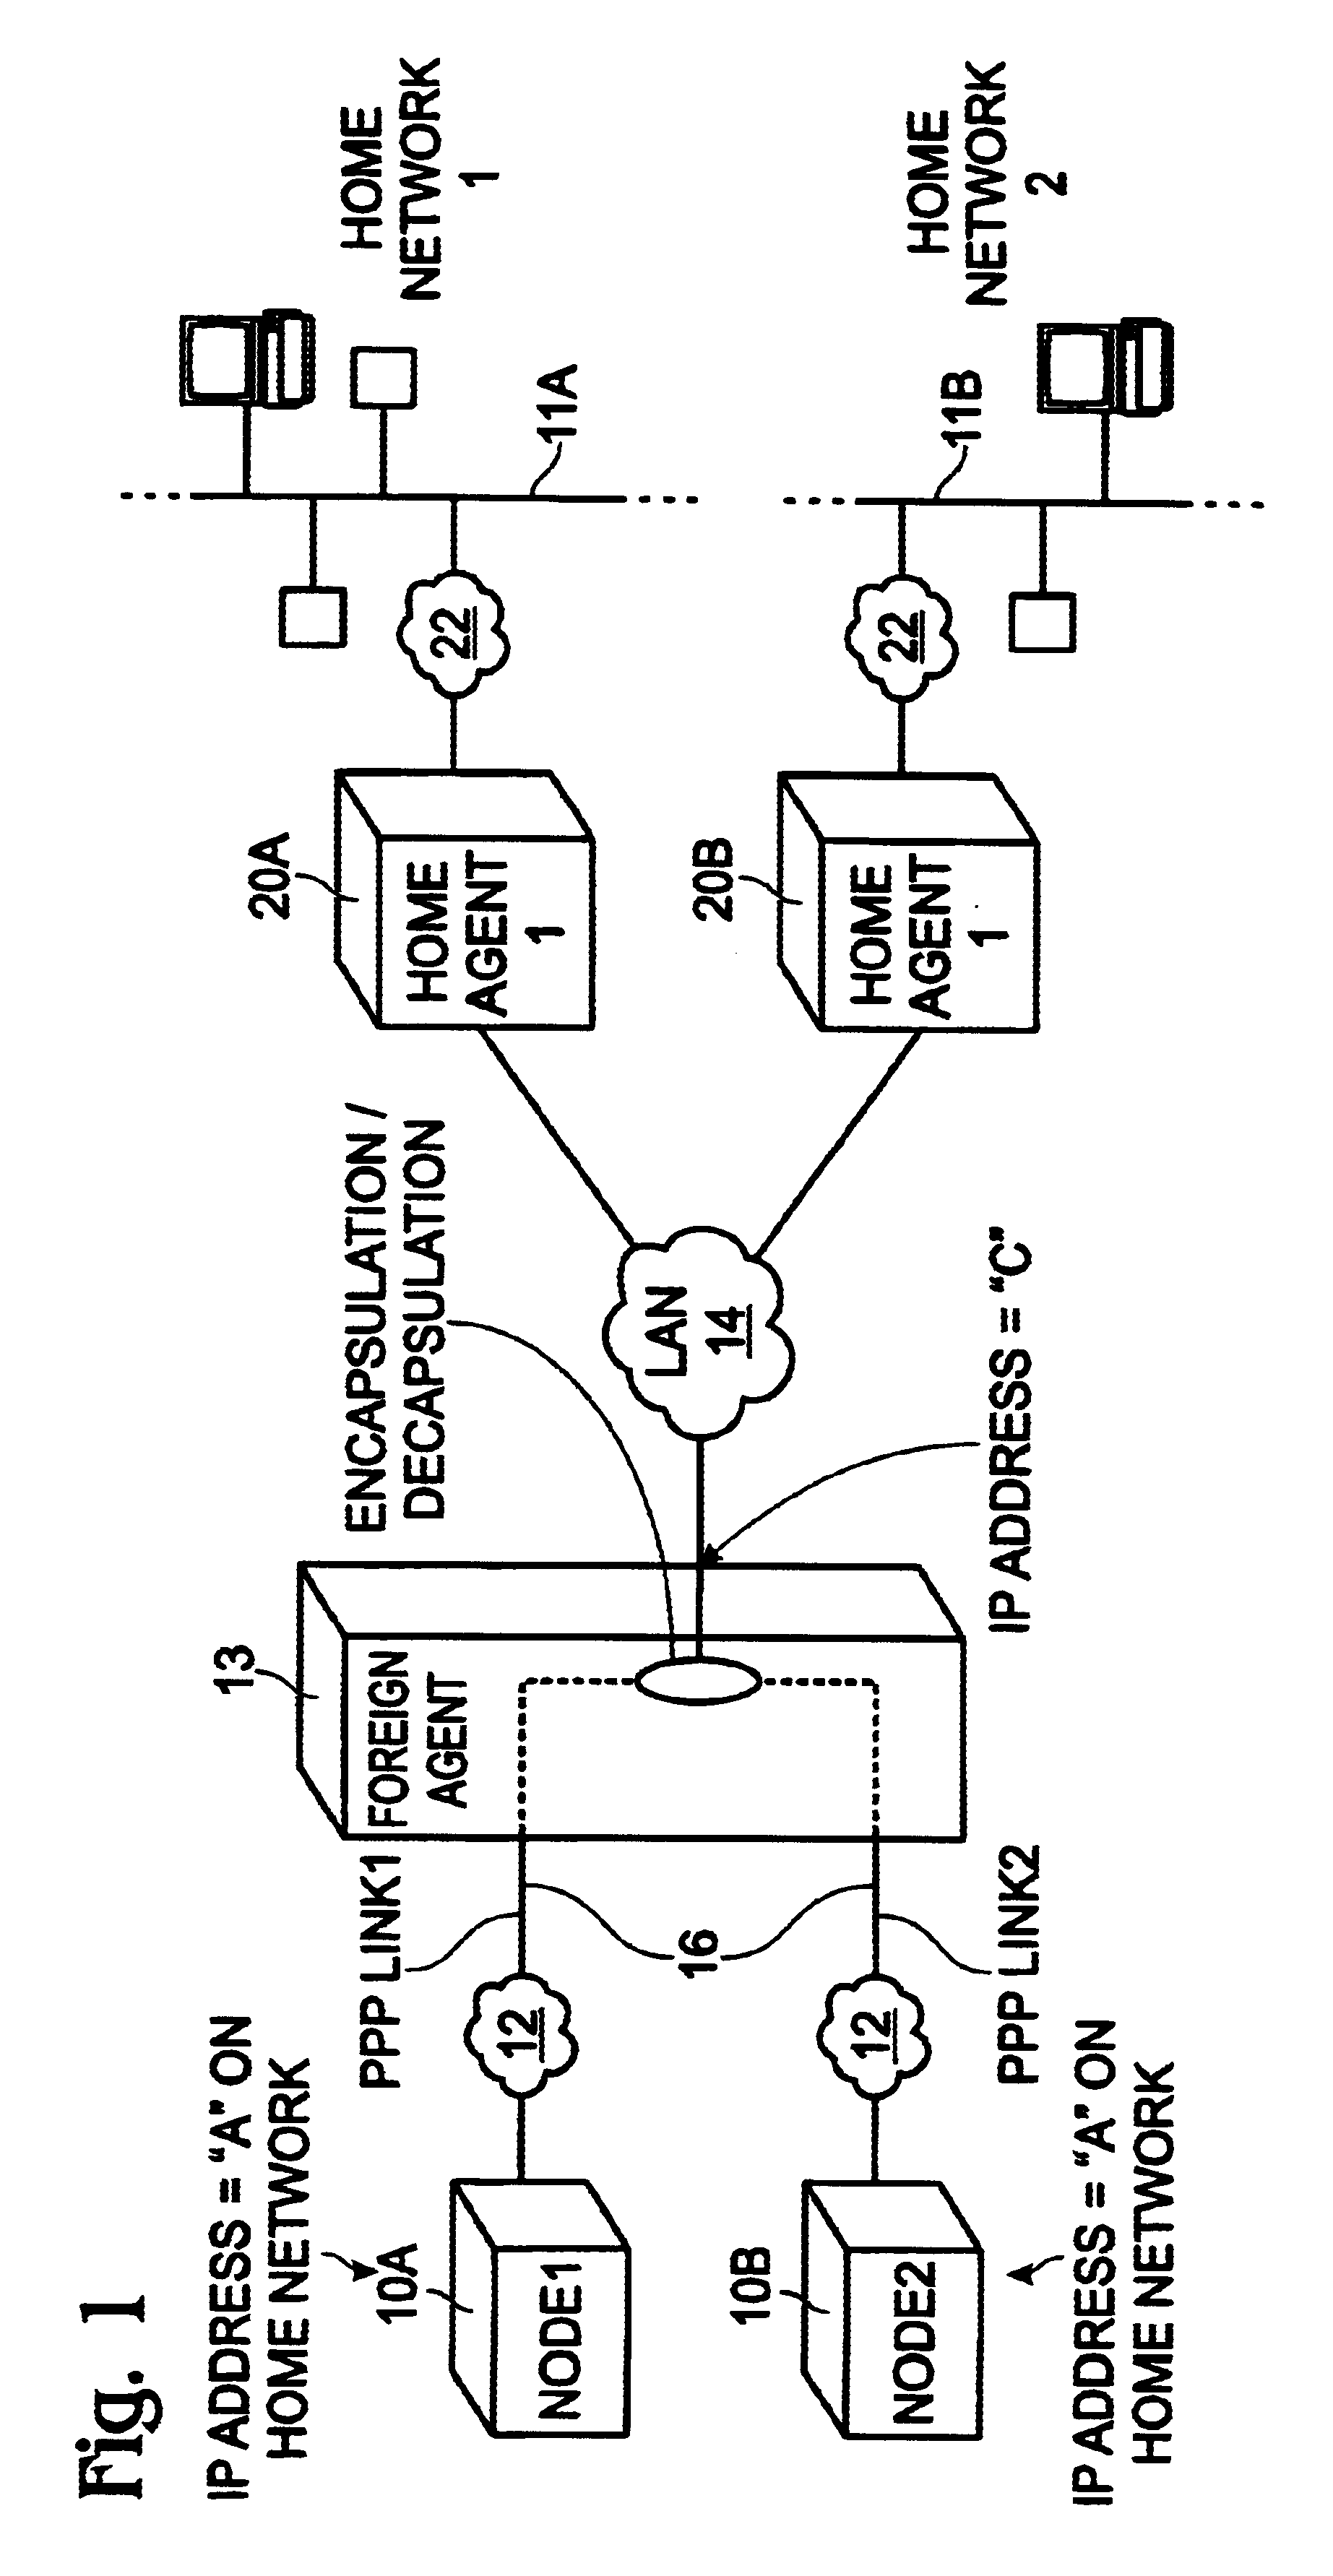 Routing method for mobile wireless nodes having overlapping internet protocol home addresses